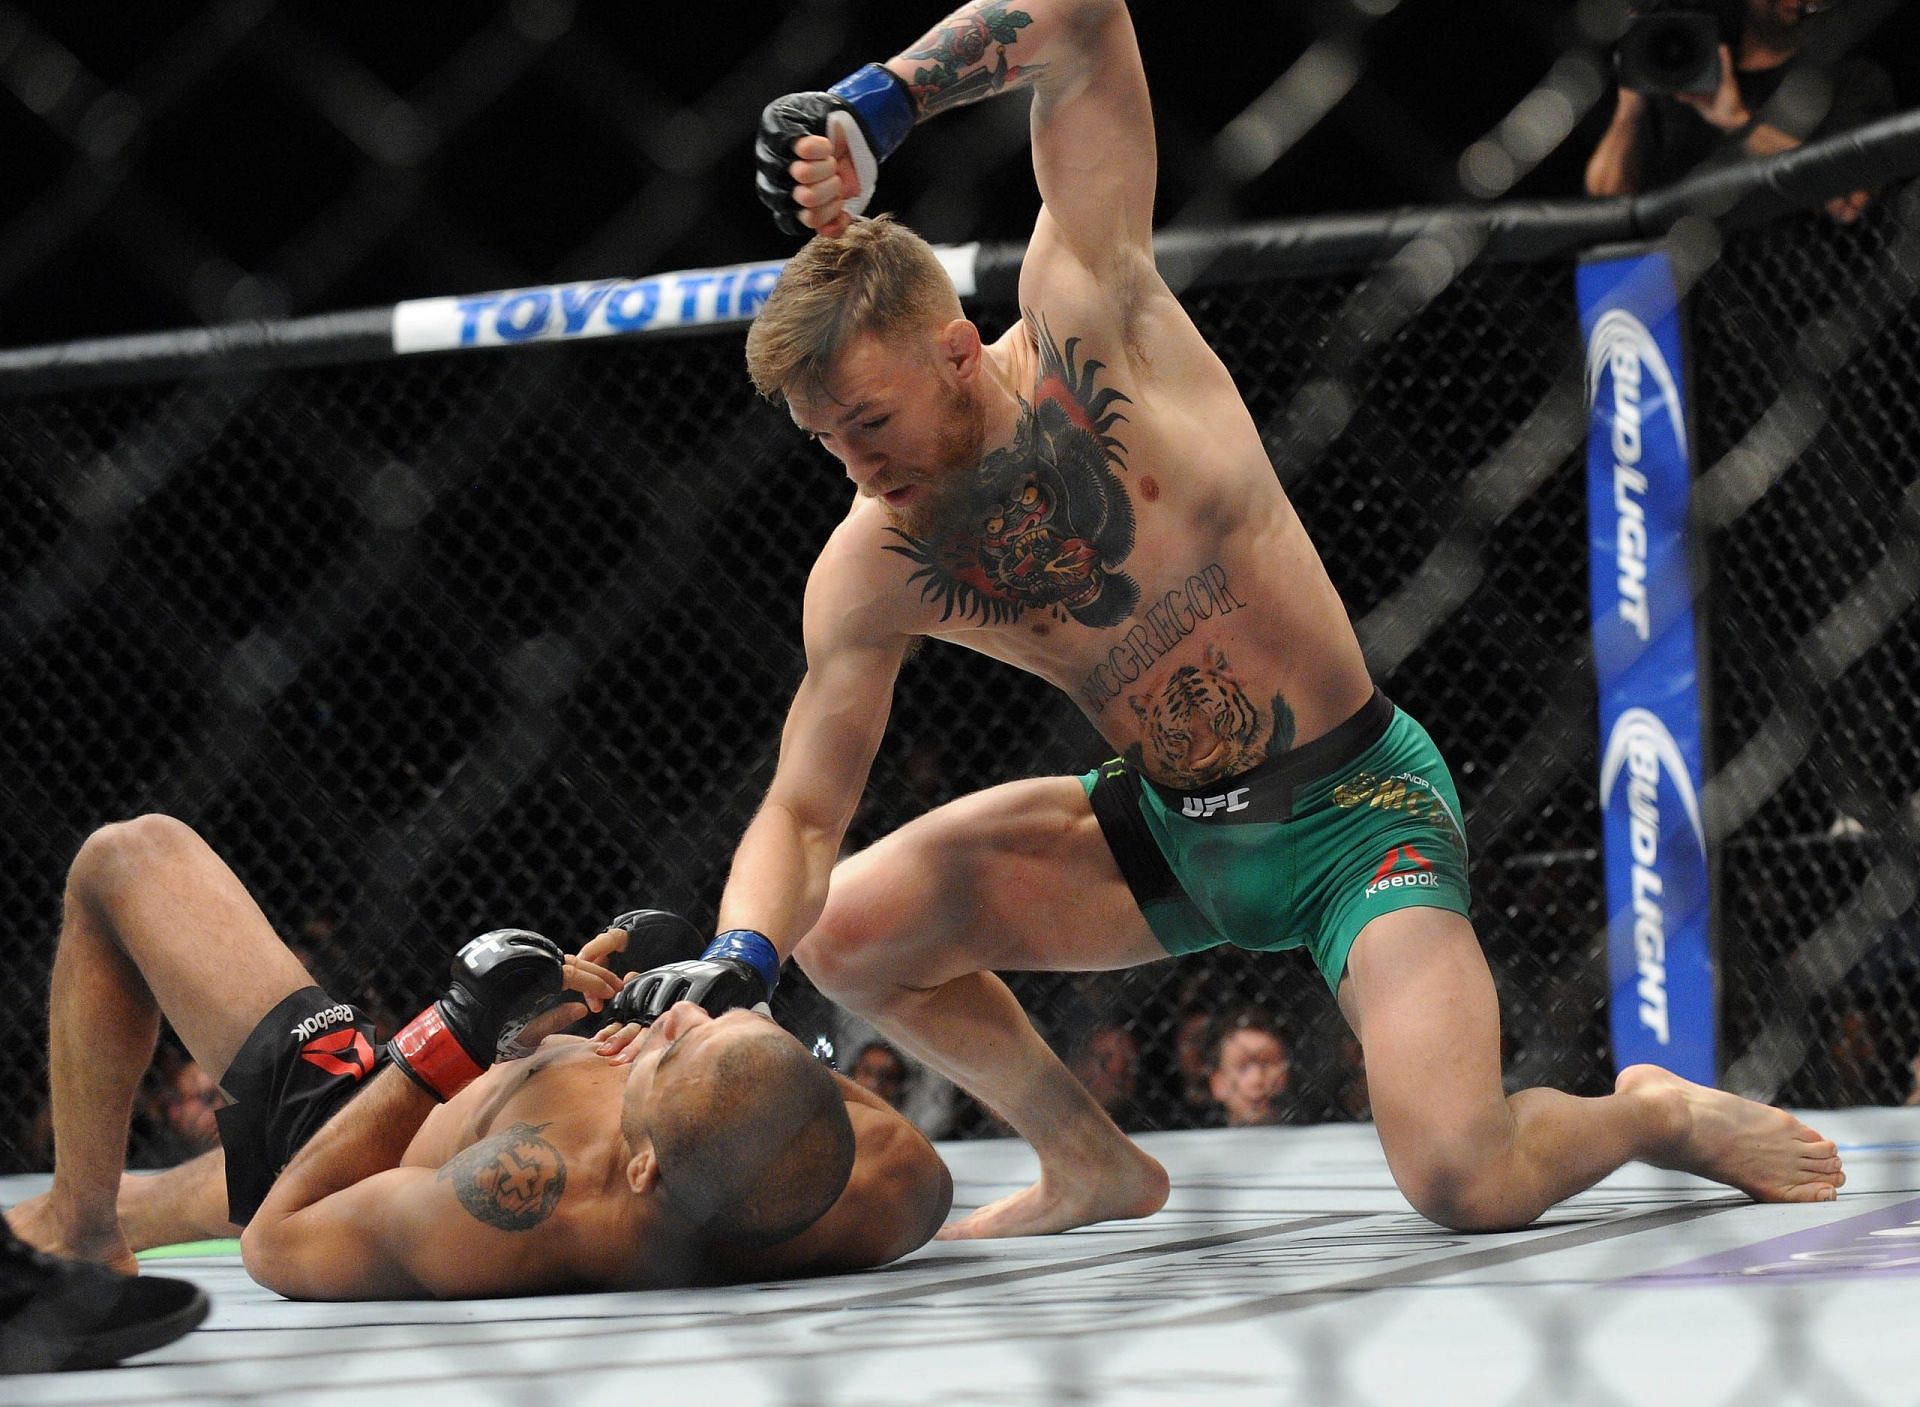 Conor McGregor became a UFC legend when he took out Jose Aldo for the undisputed featherweight title in 2015